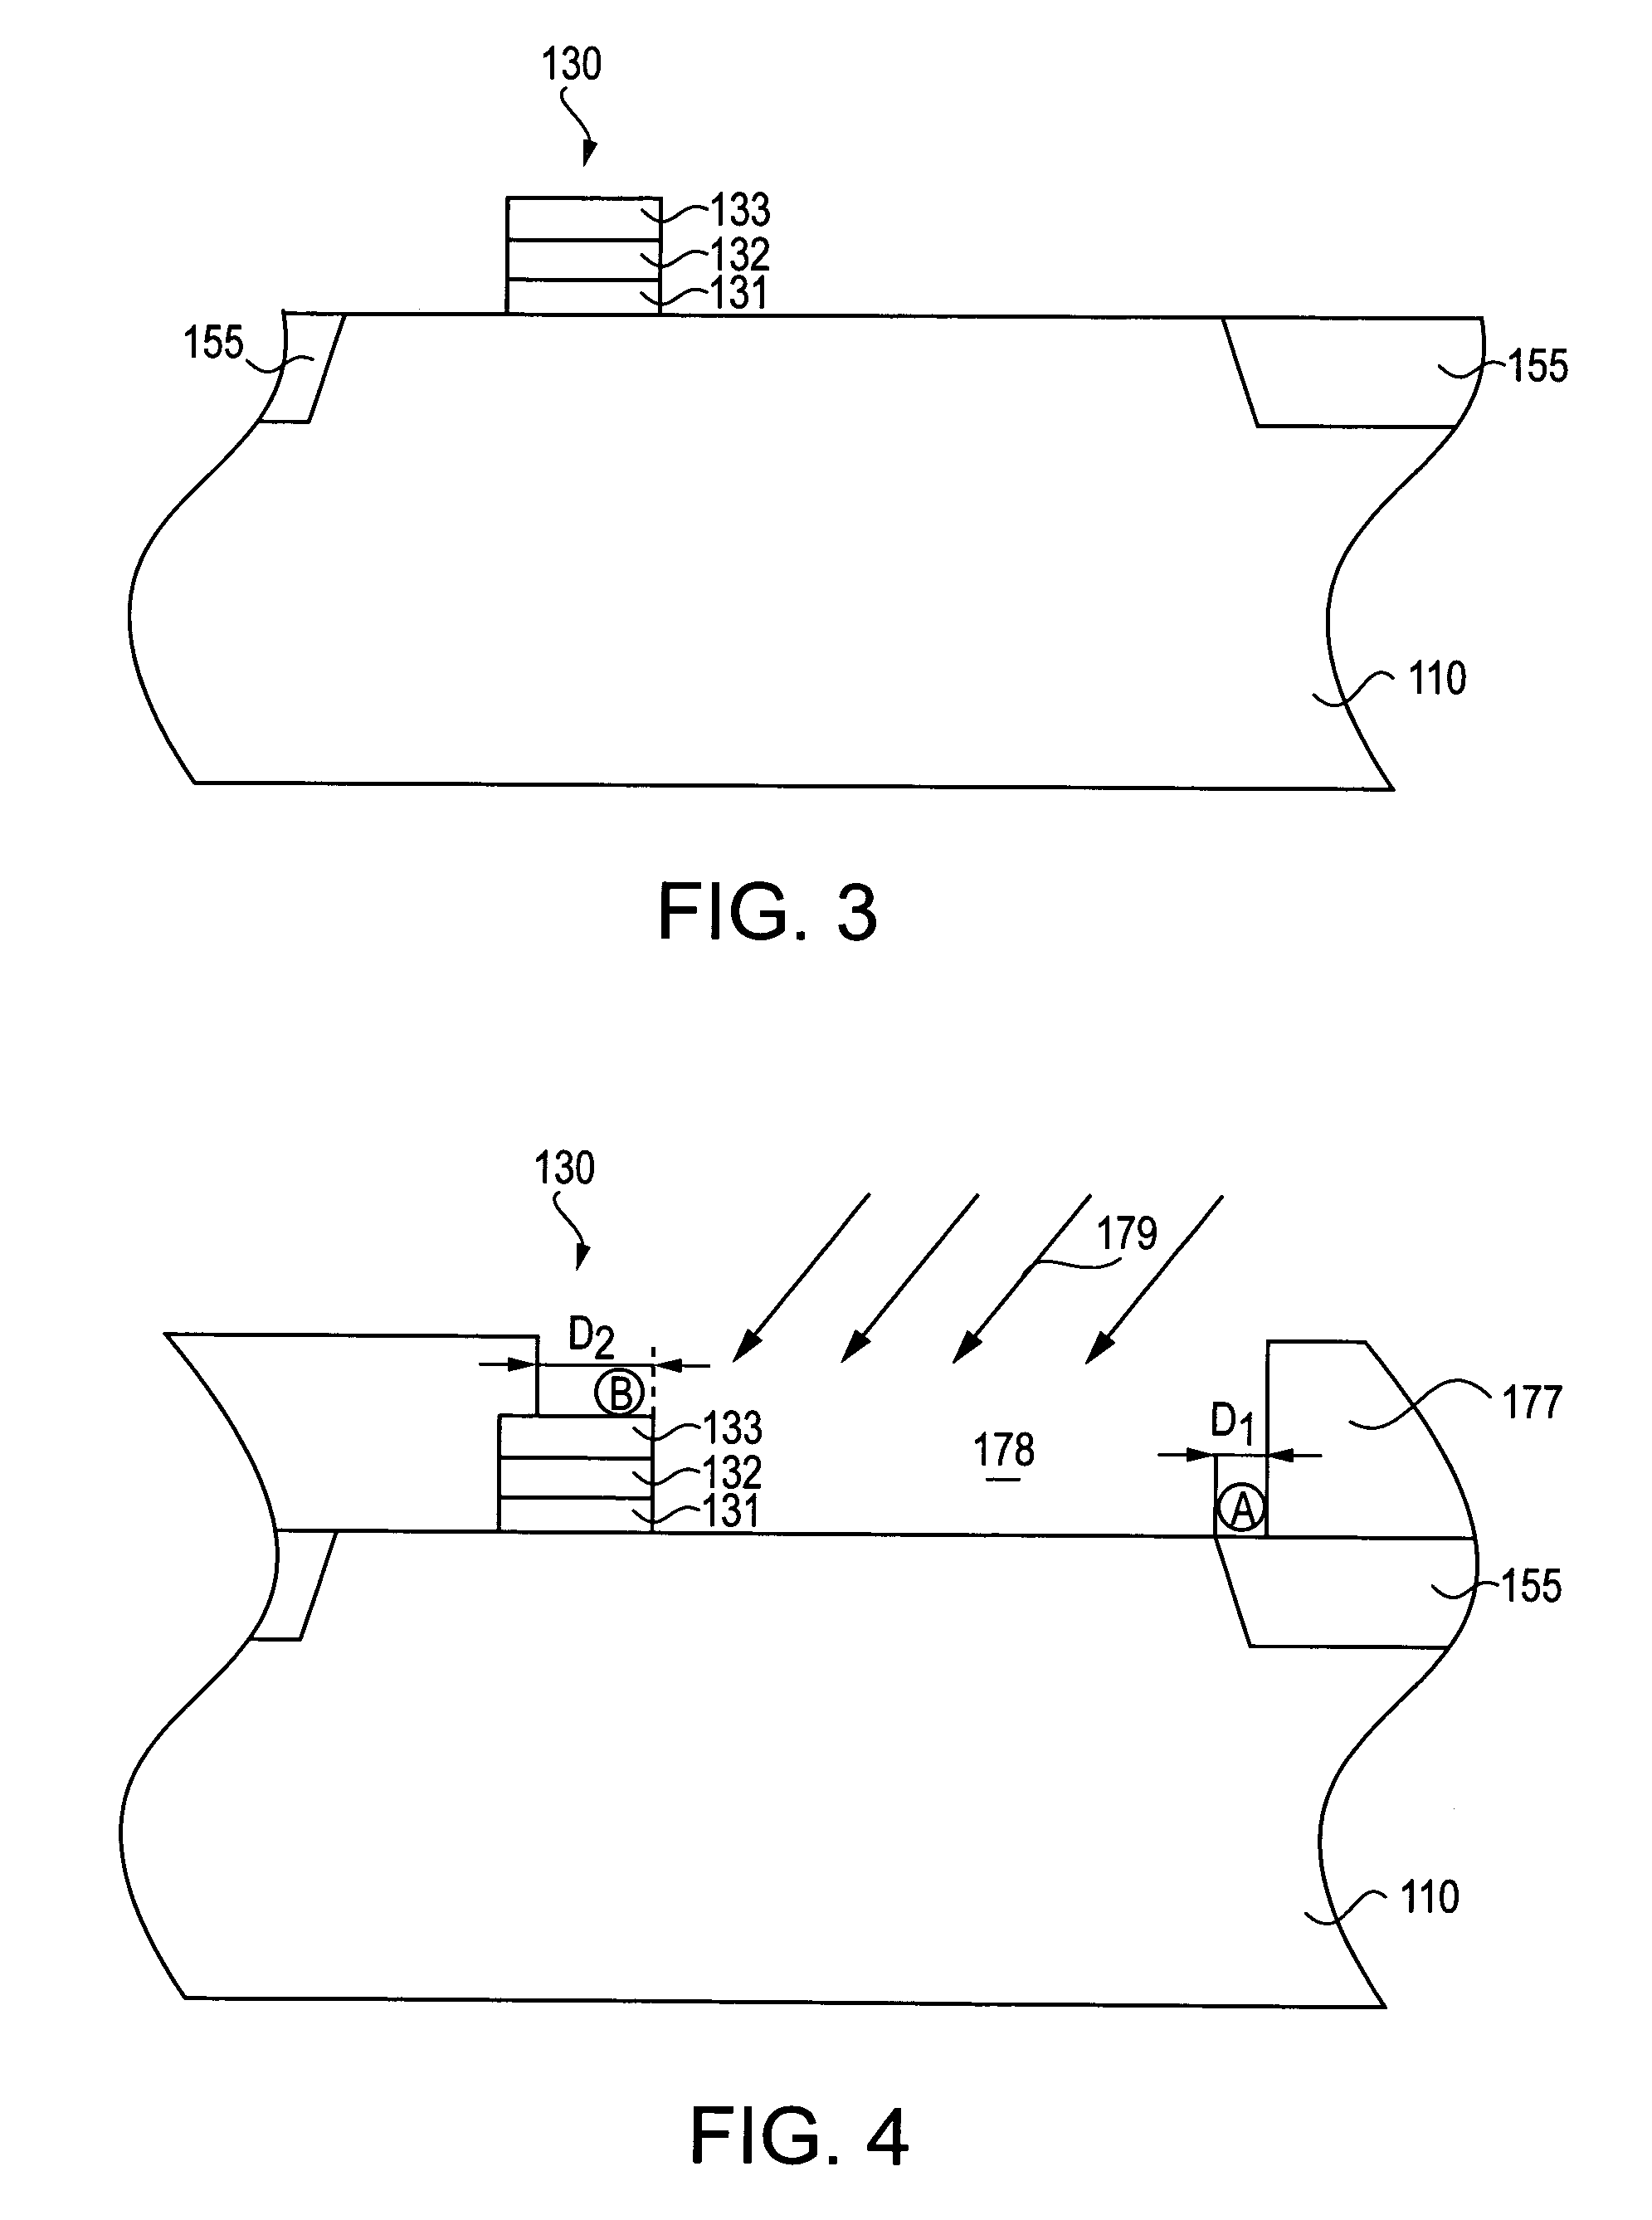 Method of forming photodiode with self-aligned implants for high quantum efficiency